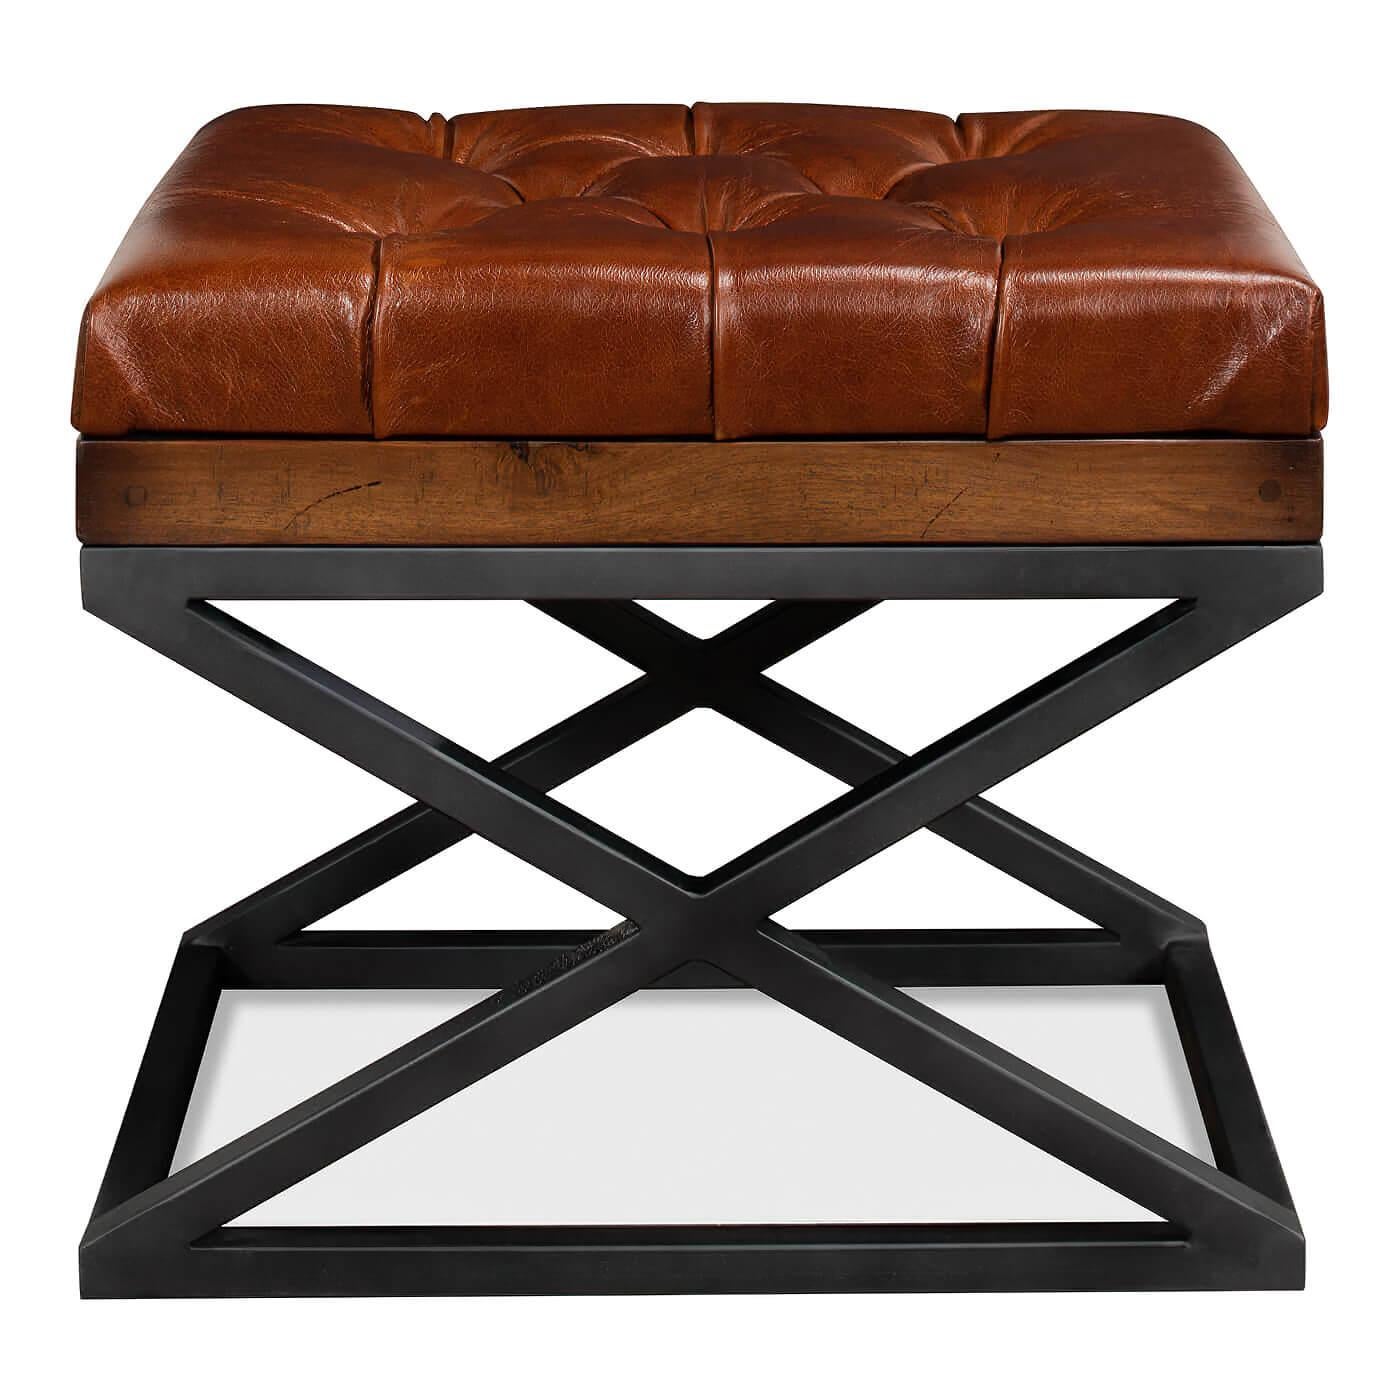 A modern tufted leather X frame stool, classic meets contemporary with this versatile piece. The top boxed cushion is crafted in rich brown leather accented with button tufting, it sits on an x shaped gunmetal frame. This piece is perfect to use as